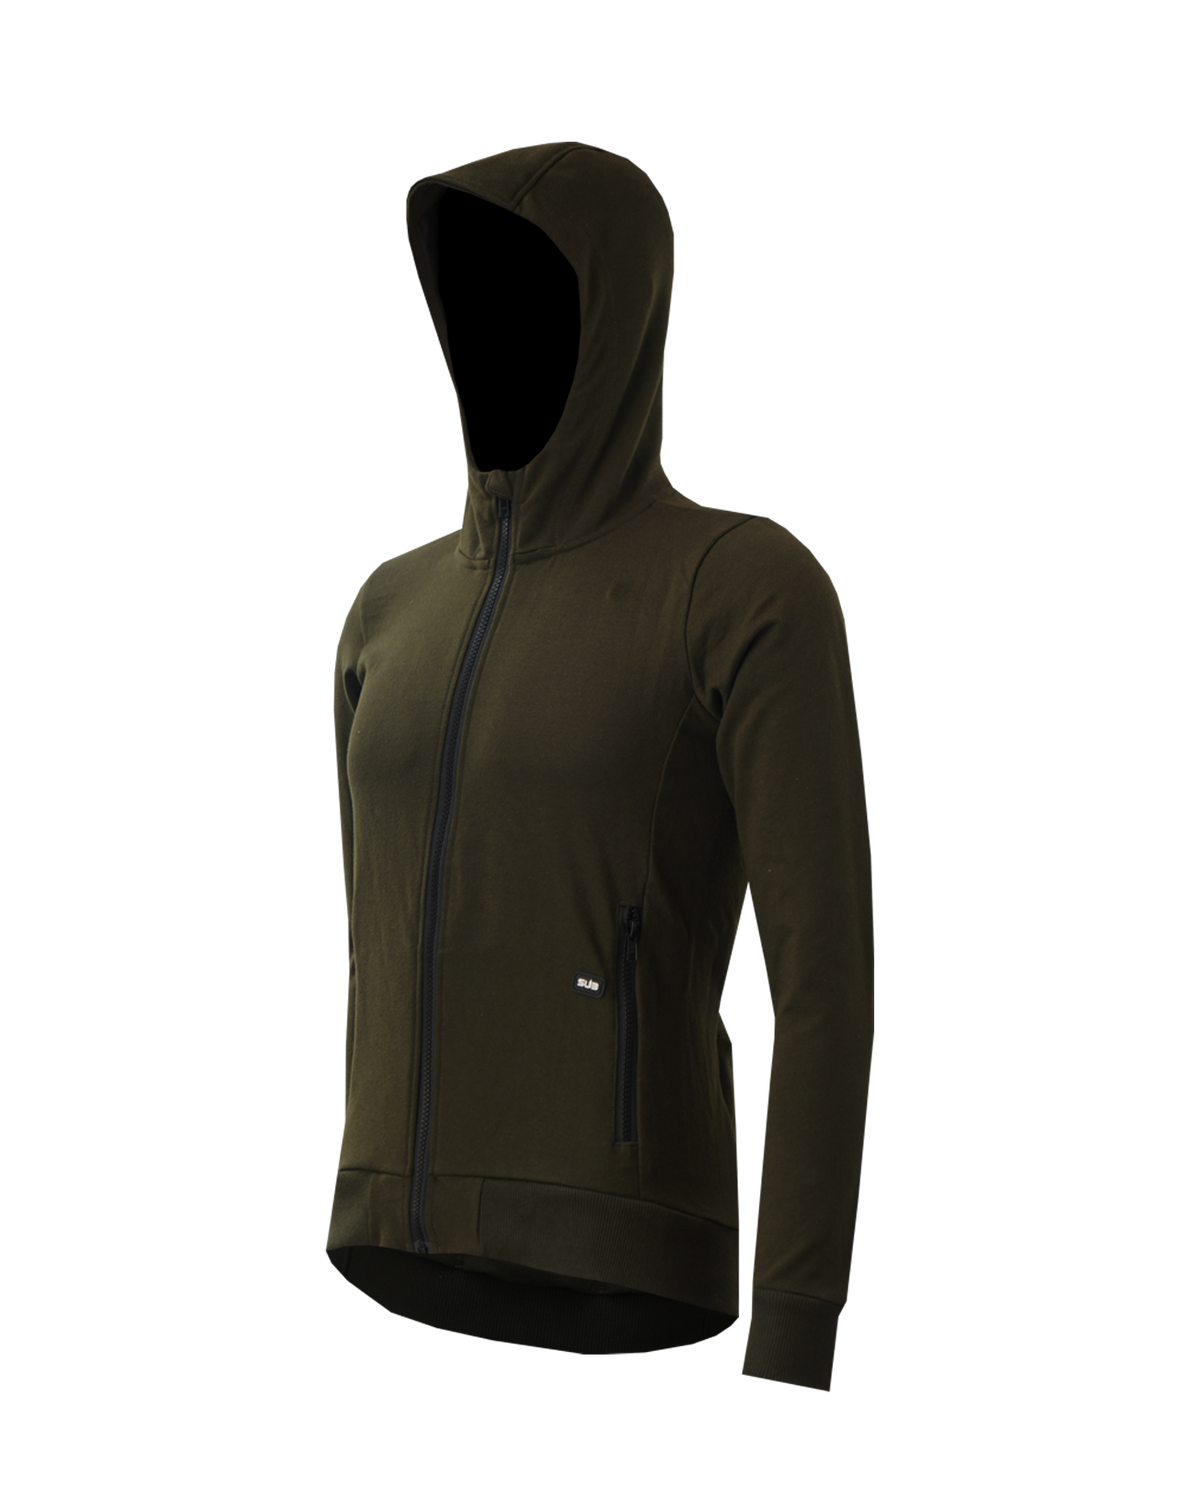 SUB Sweater Hoodie Olive + Free T-shirt 05AM Long Sleeves Navy Blue